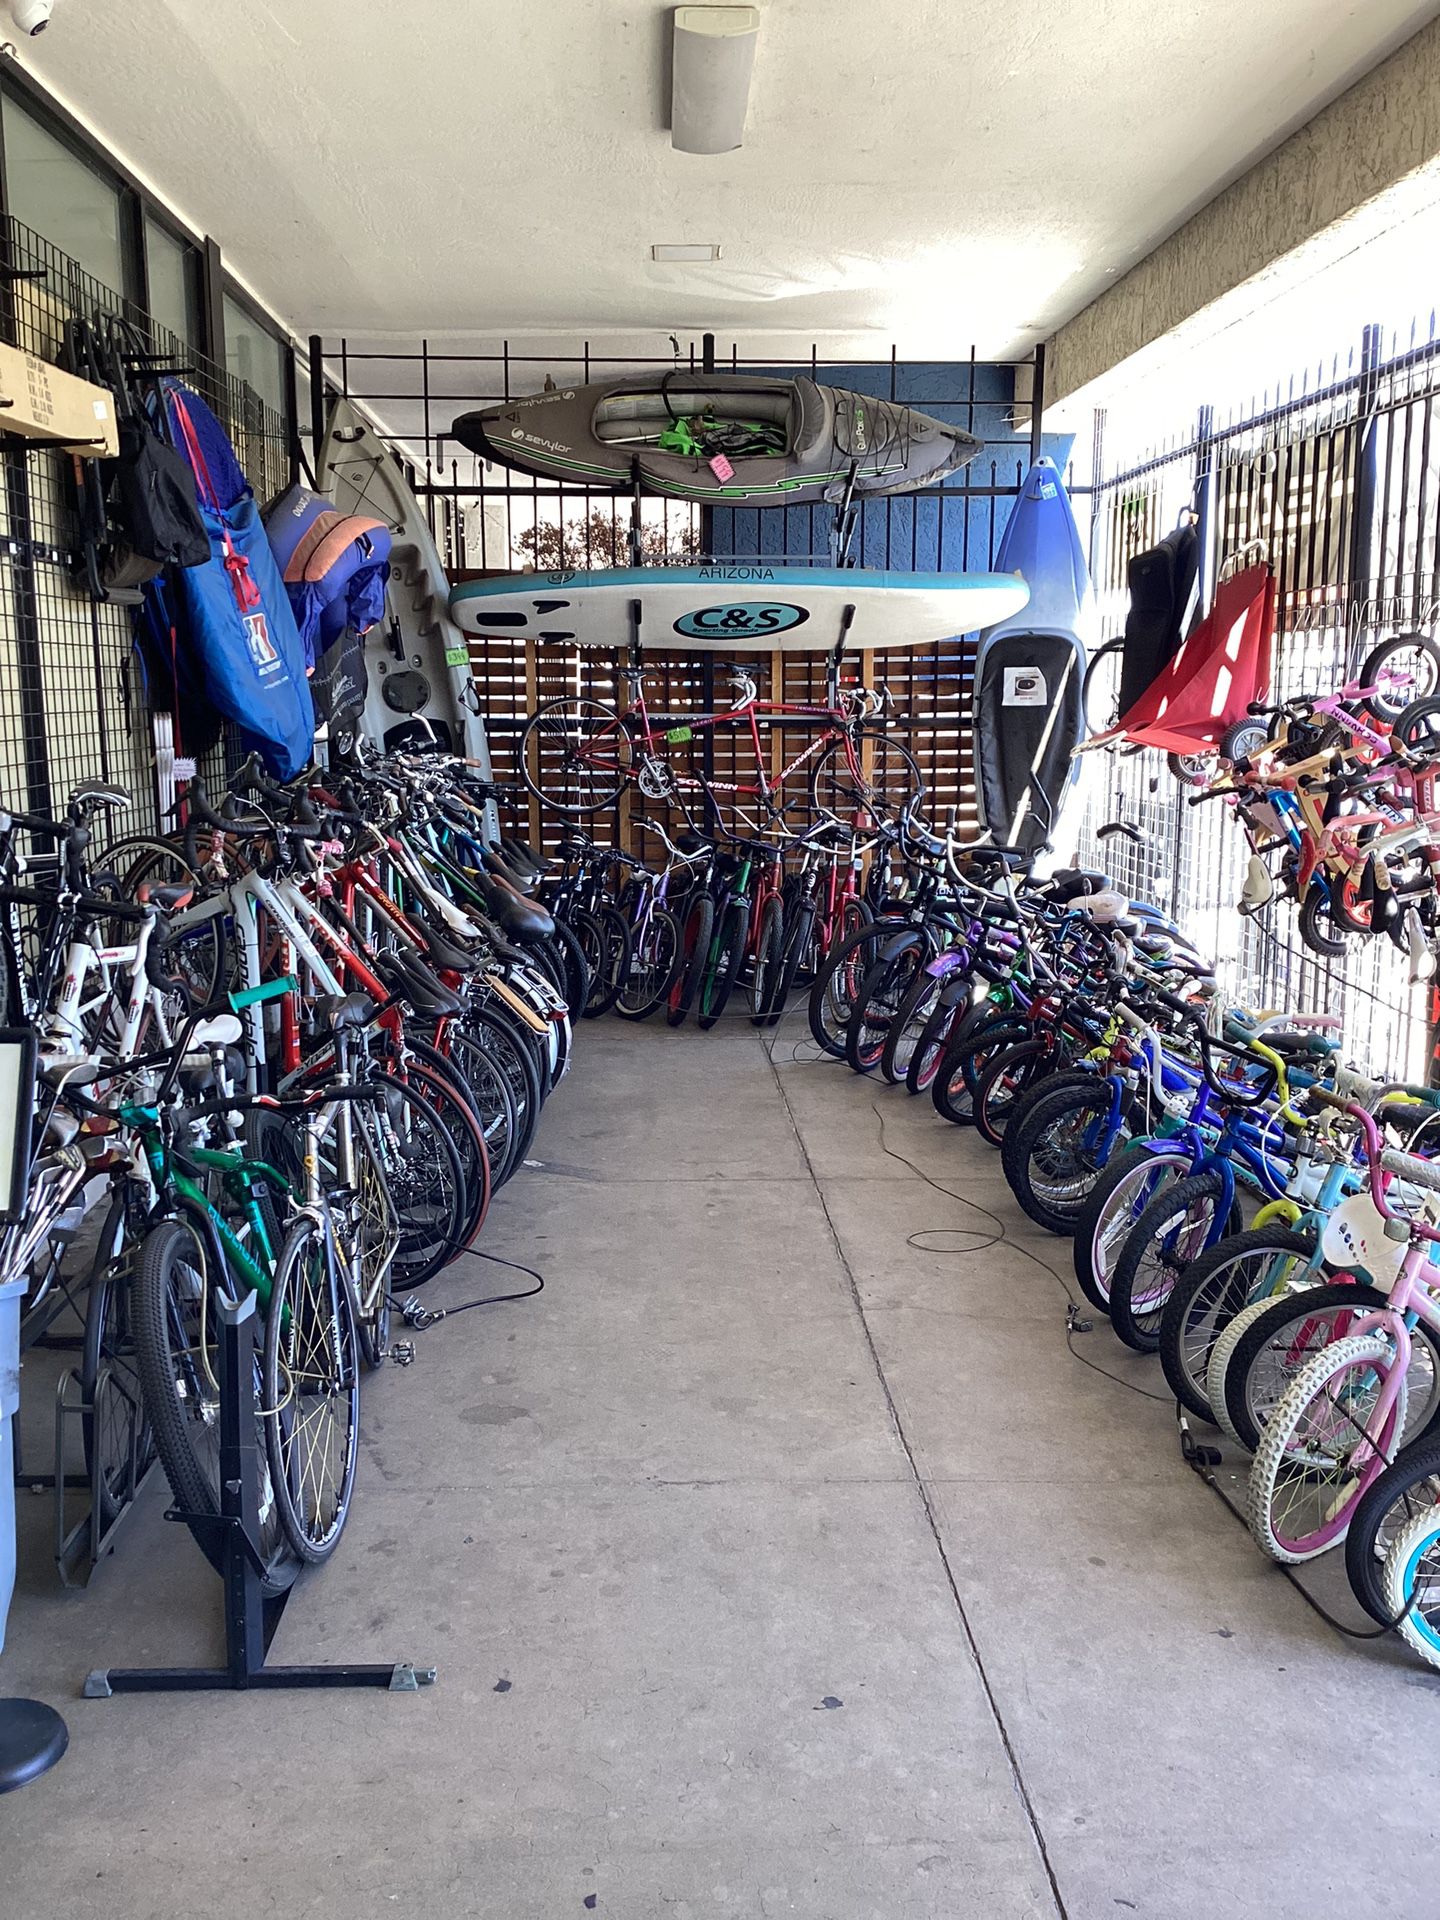 Huge Selection Of New And Uses Bikes (Mountain. Cruiser, BMX, Hybrid, Road, & Kids) Prices Vary 